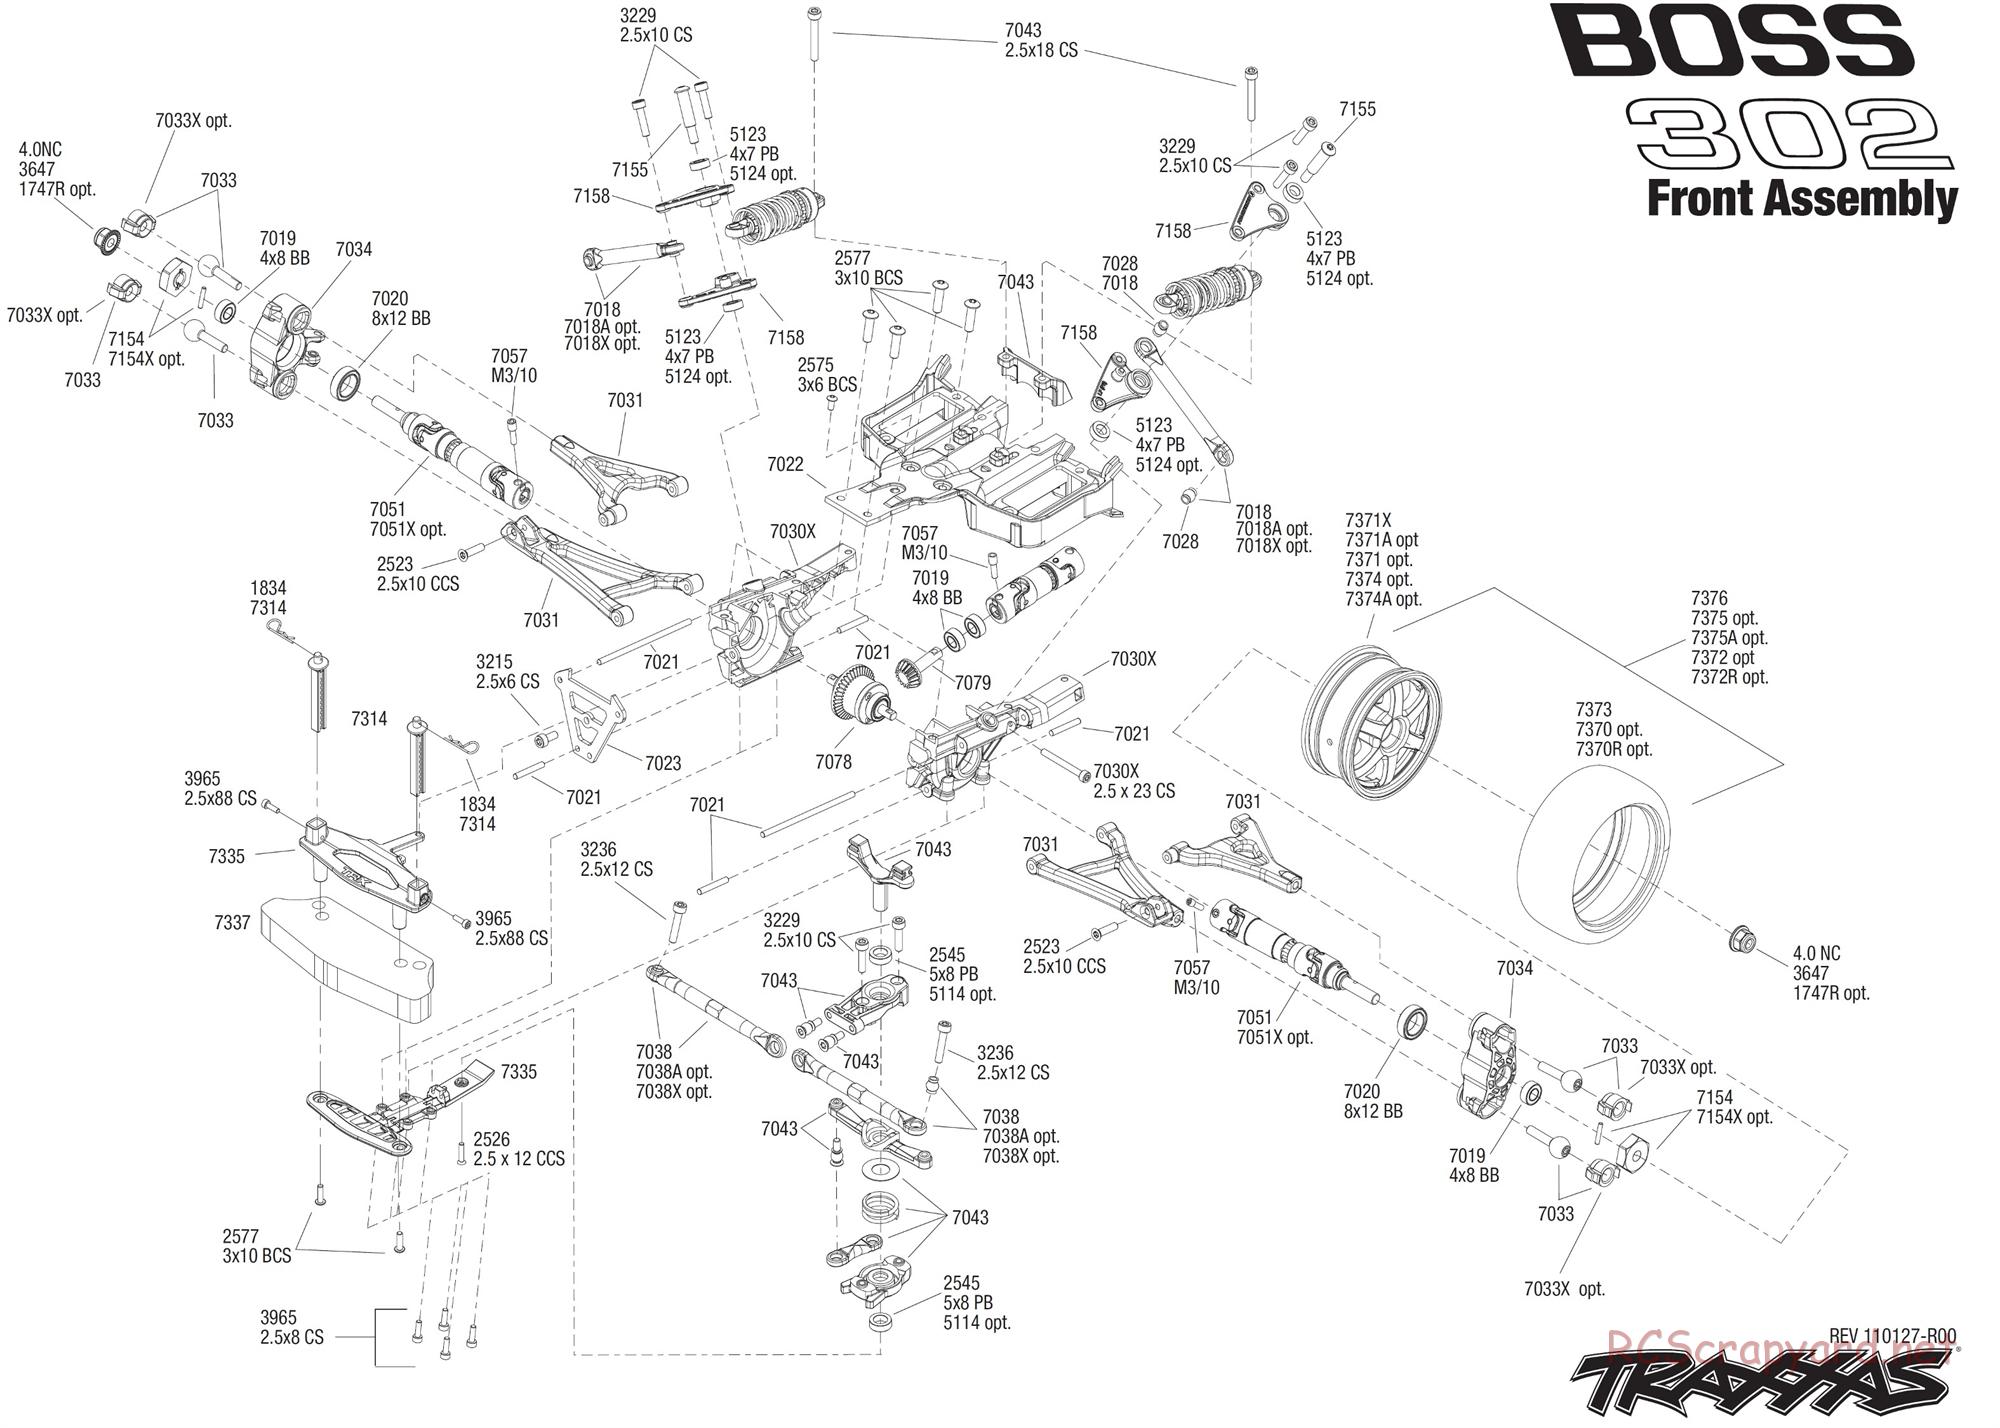 Traxxas - 1/16 Ford Mustang Boss 302 Brushless (2011) - Exploded Views - Page 3